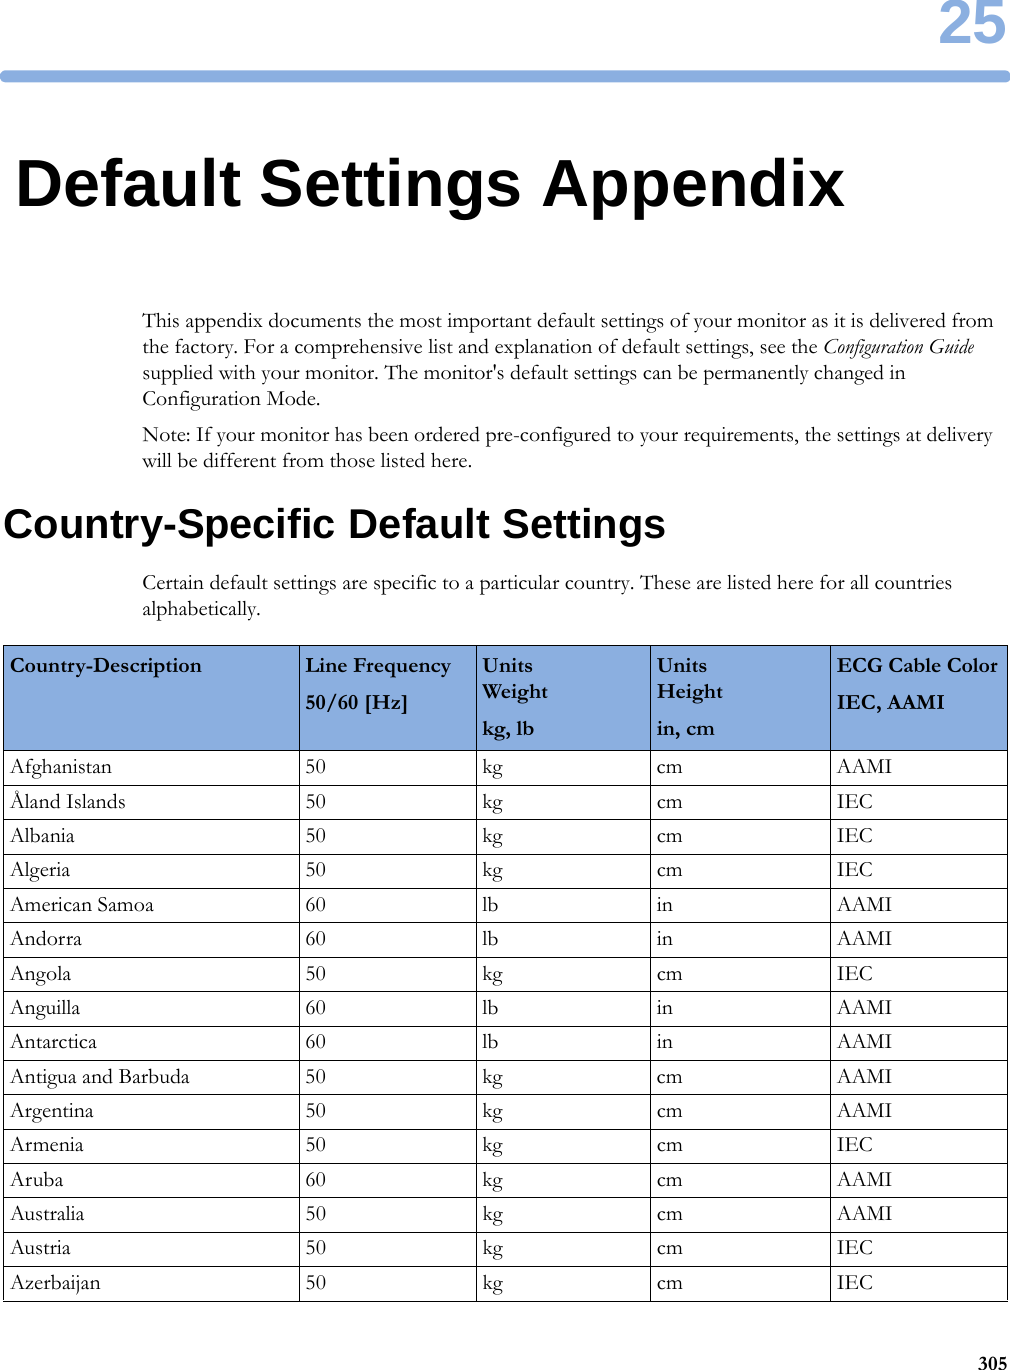 2530525Default Settings AppendixThis appendix documents the most important default settings of your monitor as it is delivered from the factory. For a comprehensive list and explanation of default settings, see the Configuration Guide supplied with your monitor. The monitor&apos;s default settings can be permanently changed in Configuration Mode.Note: If your monitor has been ordered pre-configured to your requirements, the settings at delivery will be different from those listed here.Country-Specific Default SettingsCertain default settings are specific to a particular country. These are listed here for all countries alphabetically.Country-Description Line Frequency50/60 [Hz]UnitsWeightkg, lbUnitsHeightin, cmECG Cable ColorIEC, AAMIAfghanistan 50 kg cm AAMIÅland Islands 50 kg cm IECAlbania 50 kg cm IECAlgeria 50 kg cm IECAmerican Samoa 60 lb in AAMIAndorra 60 lb in AAMIAngola 50 kg cm IECAnguilla 60 lb in AAMIAntarctica 60 lb in AAMIAntigua and Barbuda 50 kg cm AAMIArgentina 50 kg cm AAMIArmenia 50 kg cm IECAruba 60 kg cm AAMIAustralia 50 kg cm AAMIAustria 50 kg cm IECAzerbaijan 50 kg cm IEC